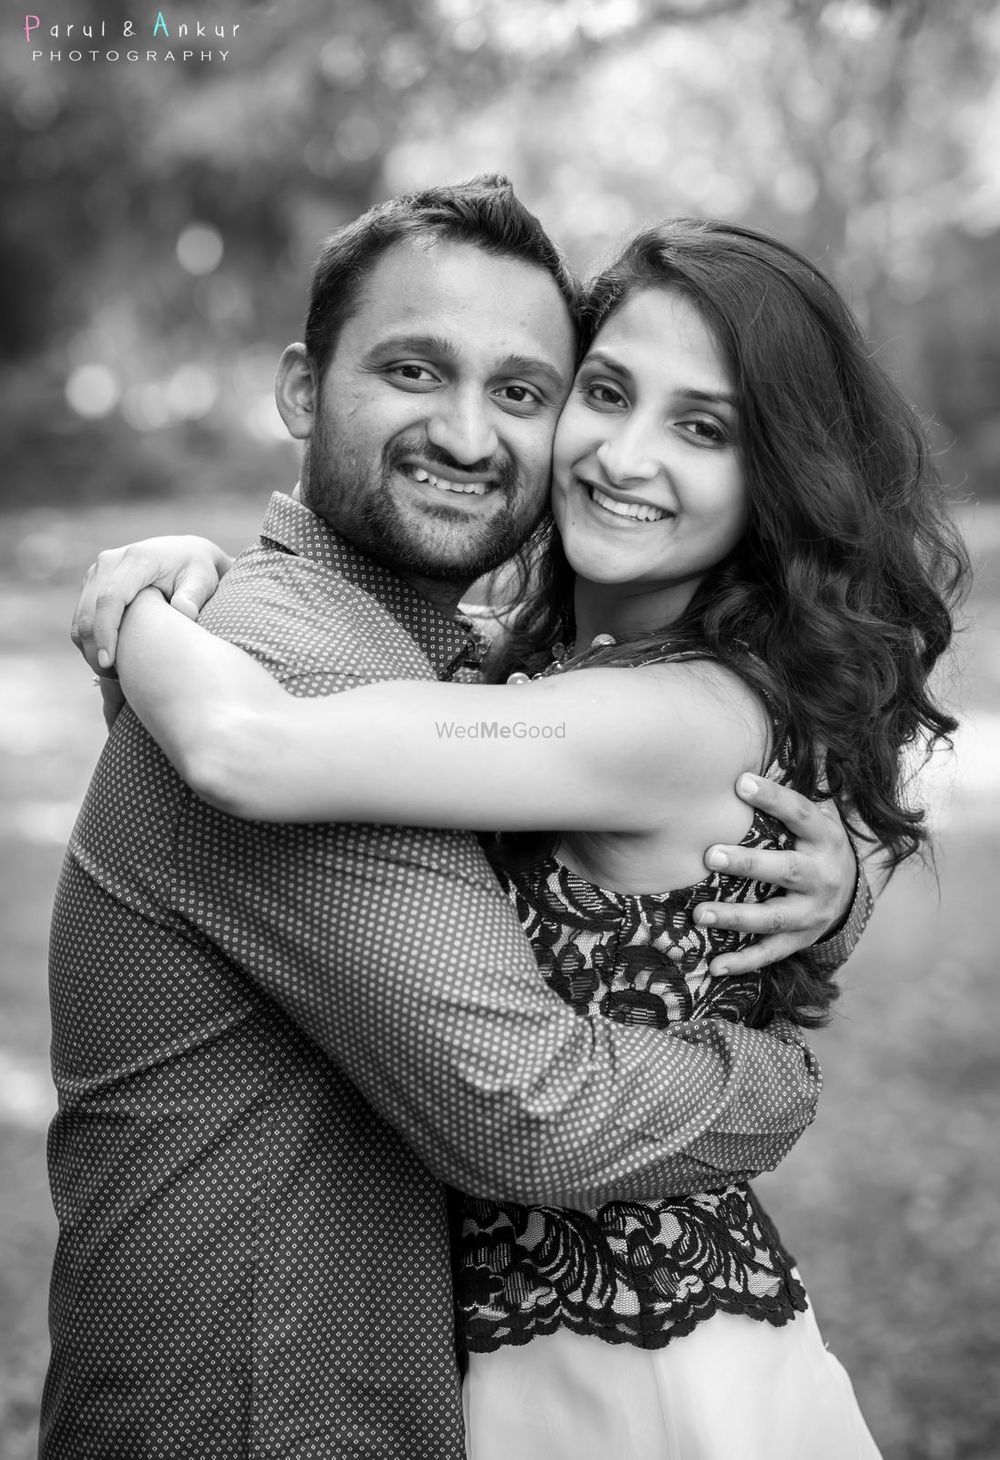 Photo From Sneha + Viral - By Parul & Ankur Kaushal Photography